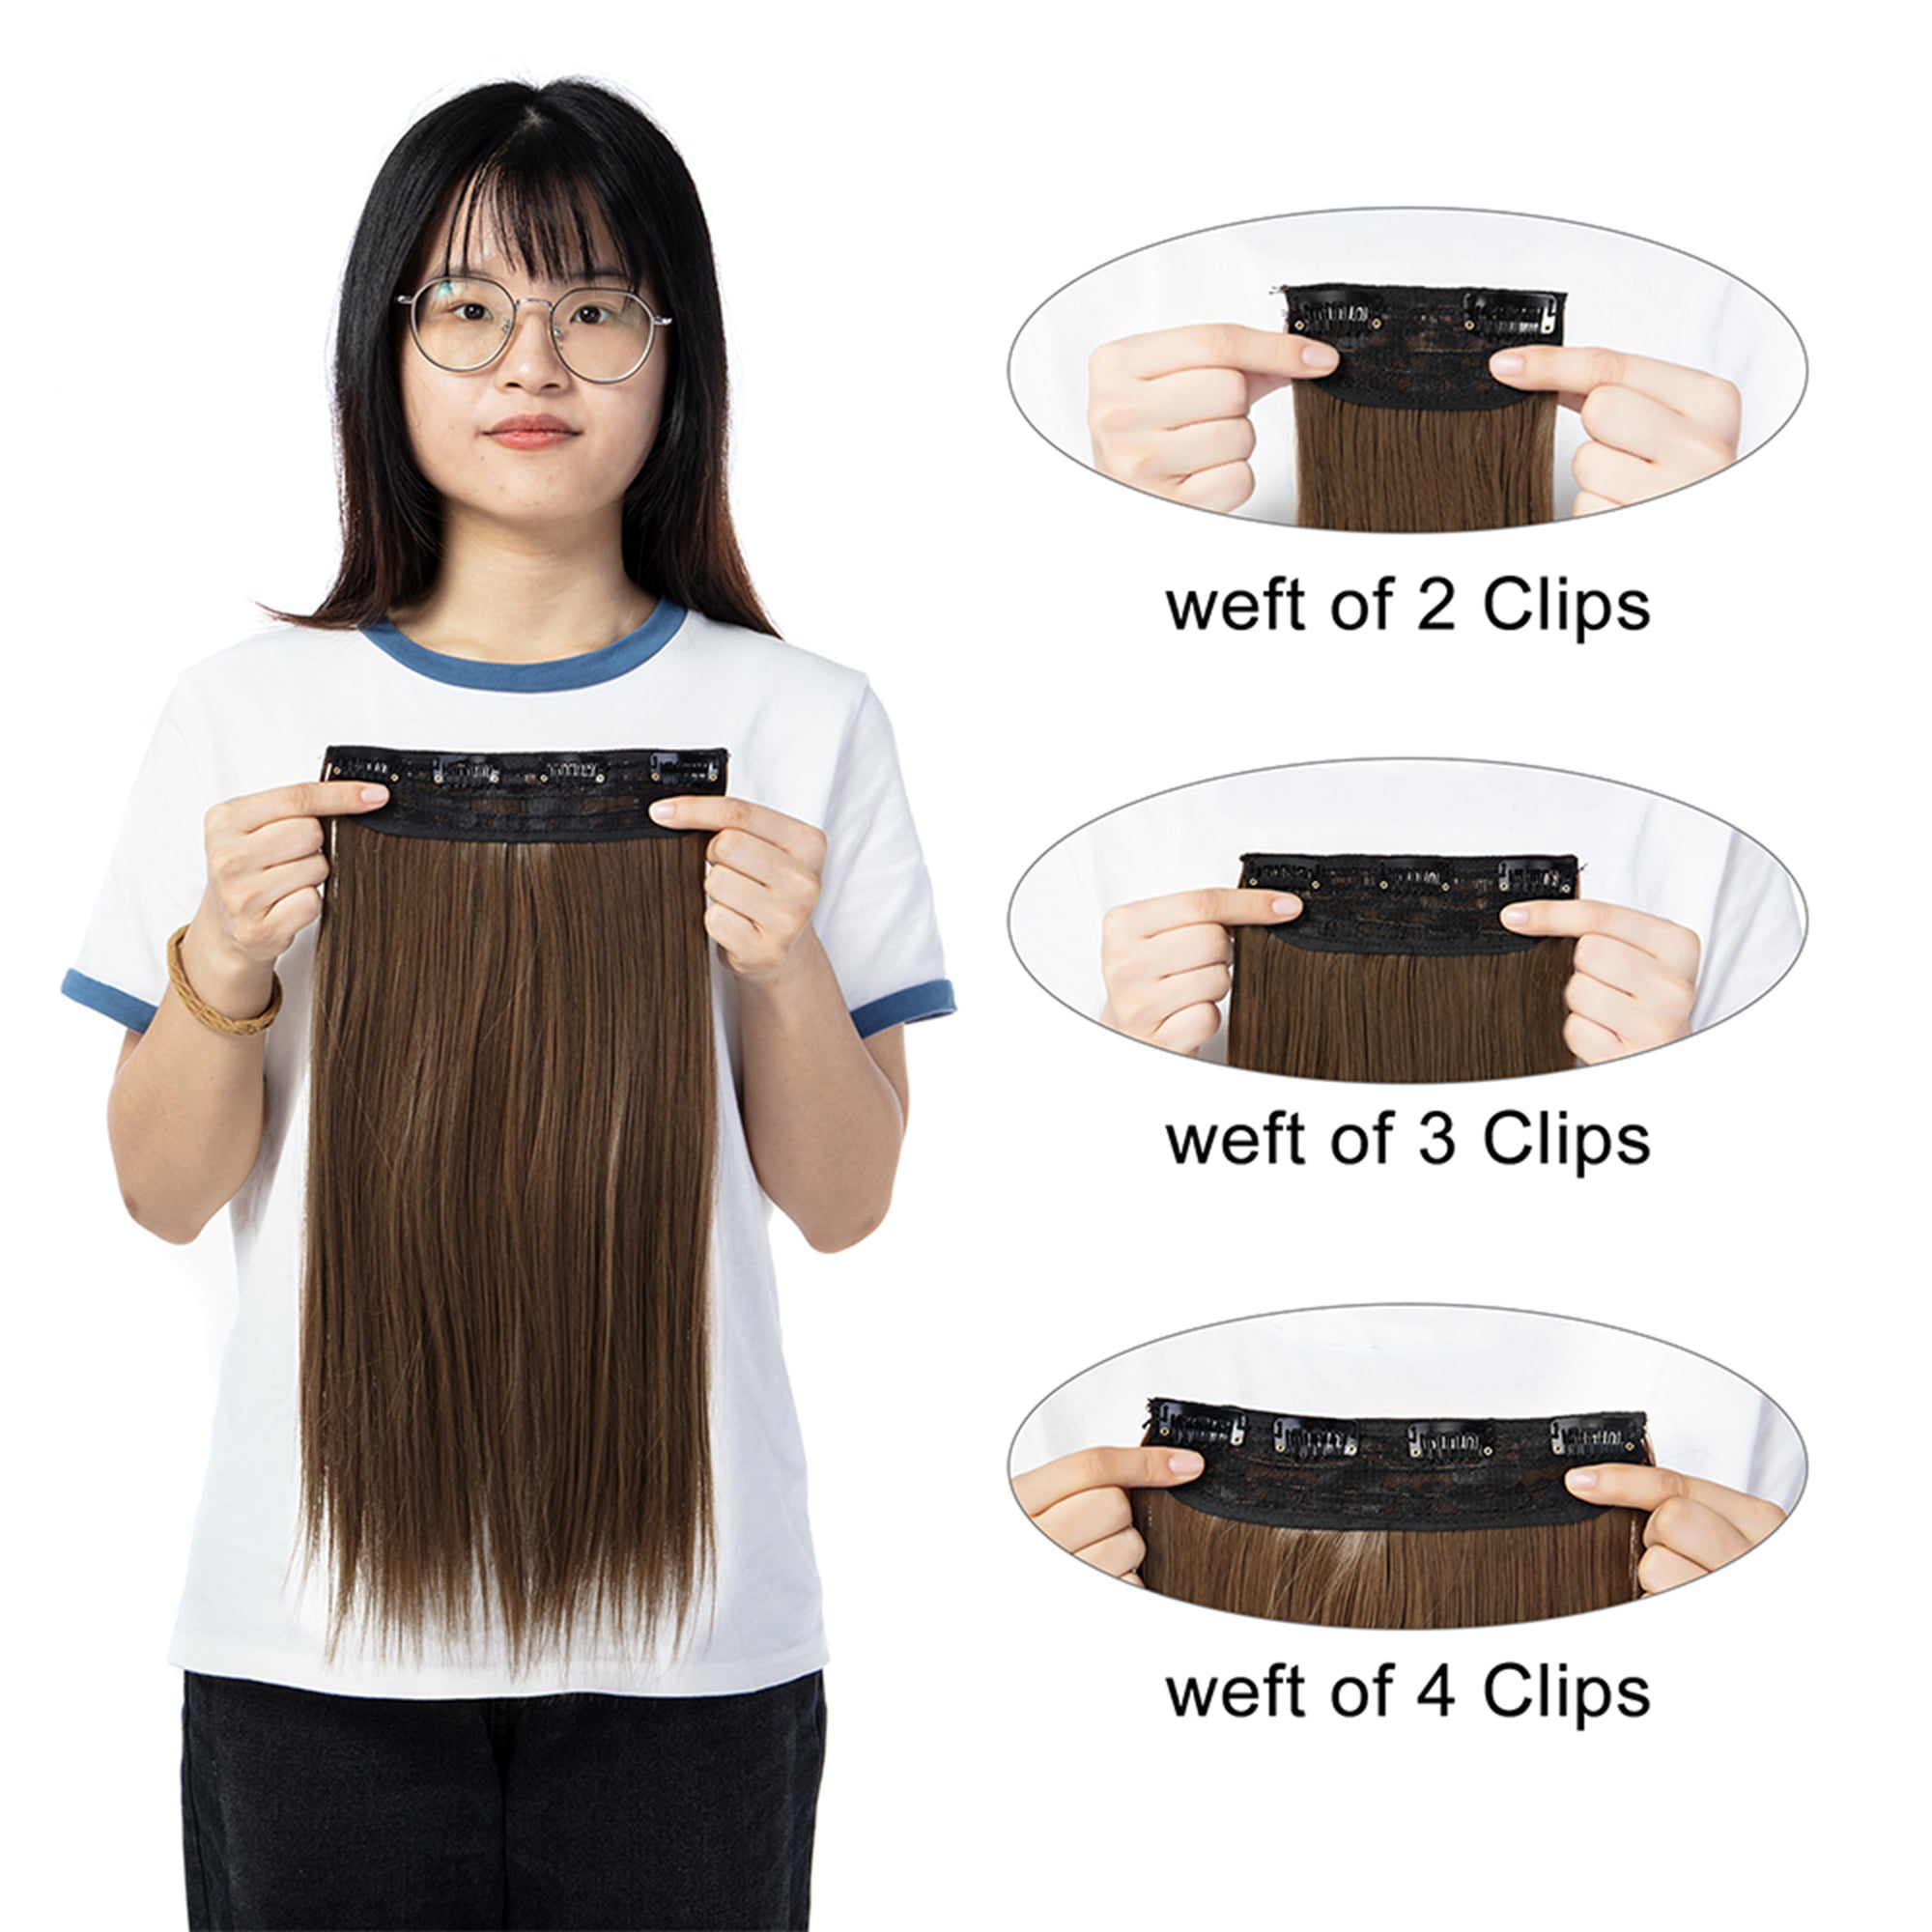 LELINTA 18/24 Clip In Hair Extensions 4 PCS Long Straight Curly Wavy Hair  Extension Hairpieces for Women Girls Hair Extension Ponytail Full Head